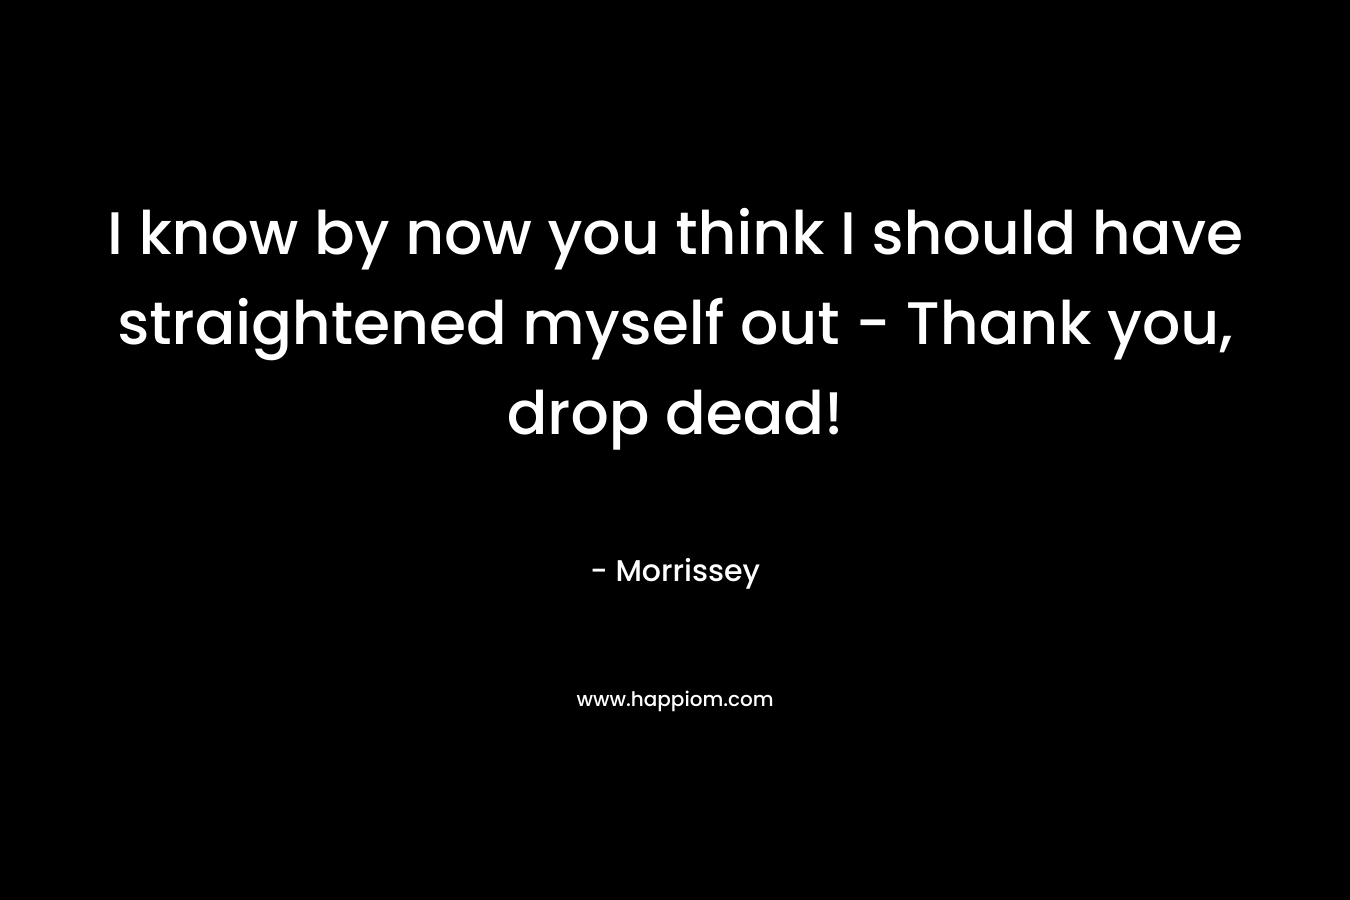 I know by now you think I should have straightened myself out - Thank you, drop dead!